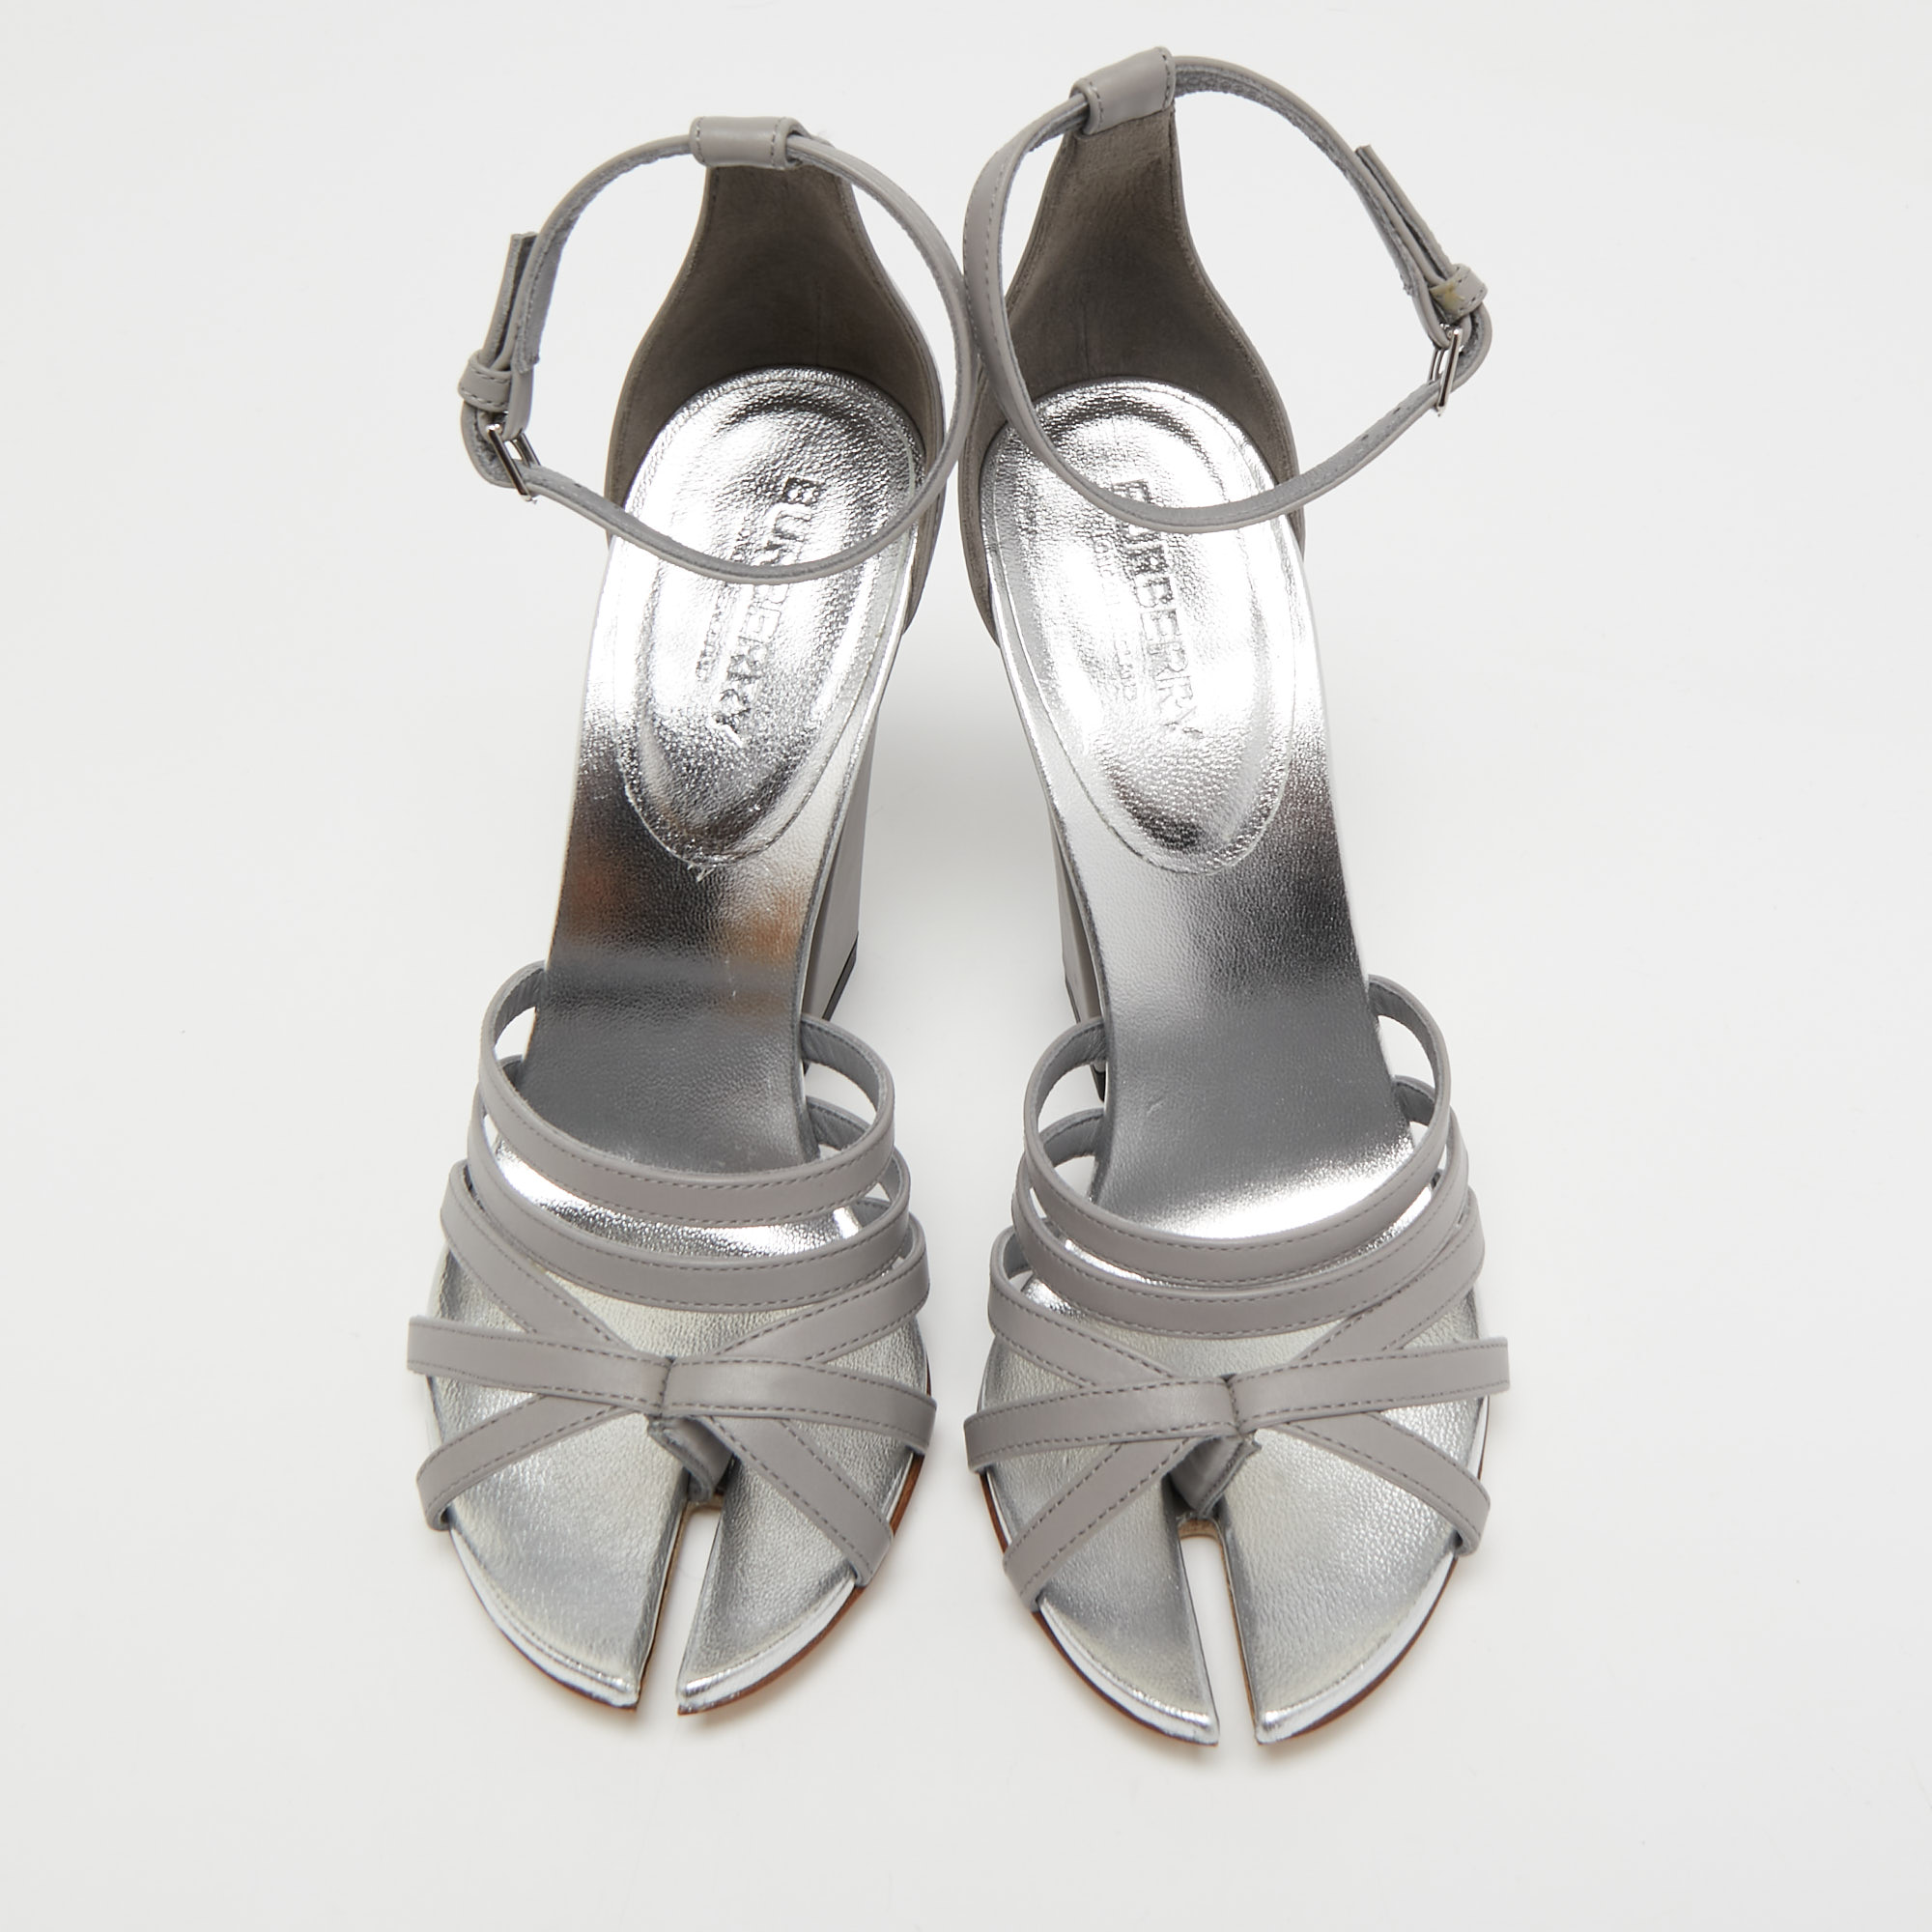 Burberry Grey Leather Hovehigh Ankle Sandals Size 37